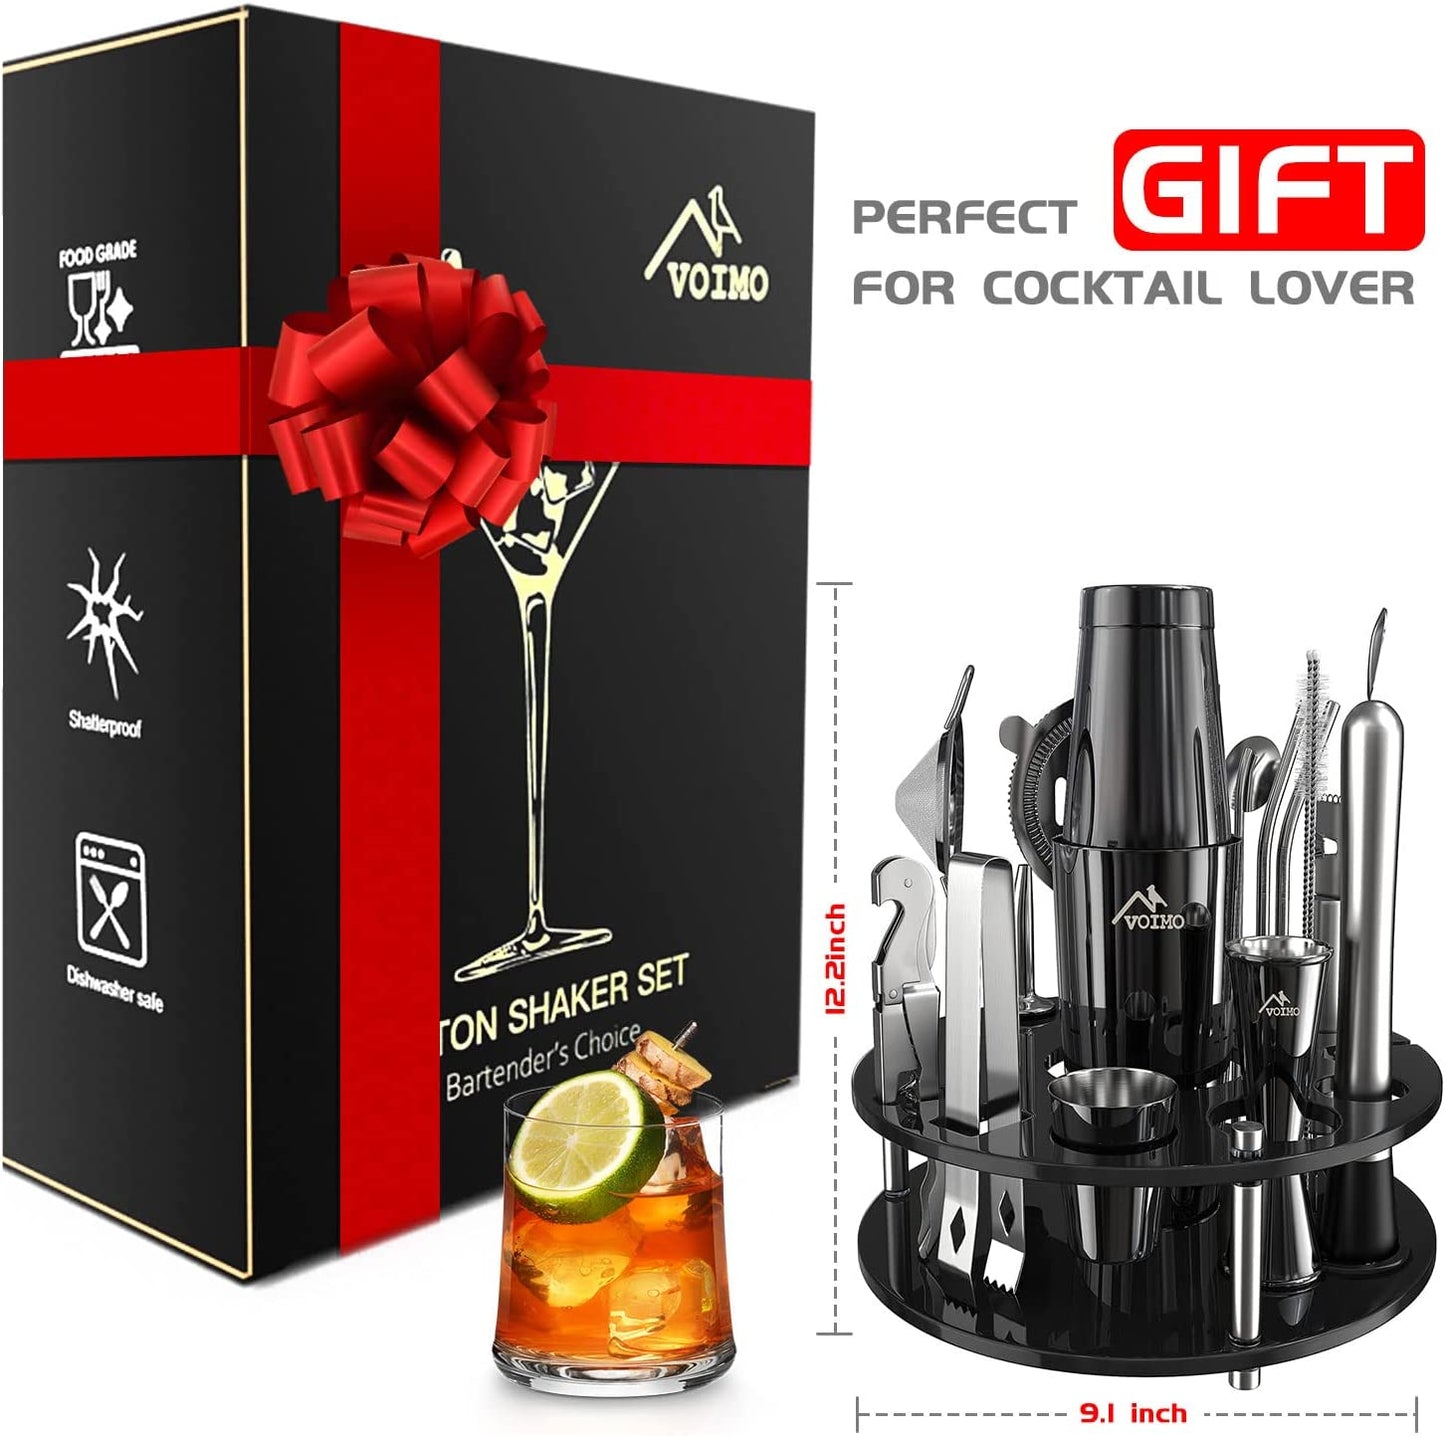 Bartender Kit, VOIMO Premium Cocktail Shaker Boston Shaker Set with Rotating Acrylic Stand & Cocktail Recipes, Bar Tools Set for Home or Professional Bartending, Perfect Cocktail Set for Drink Mixing